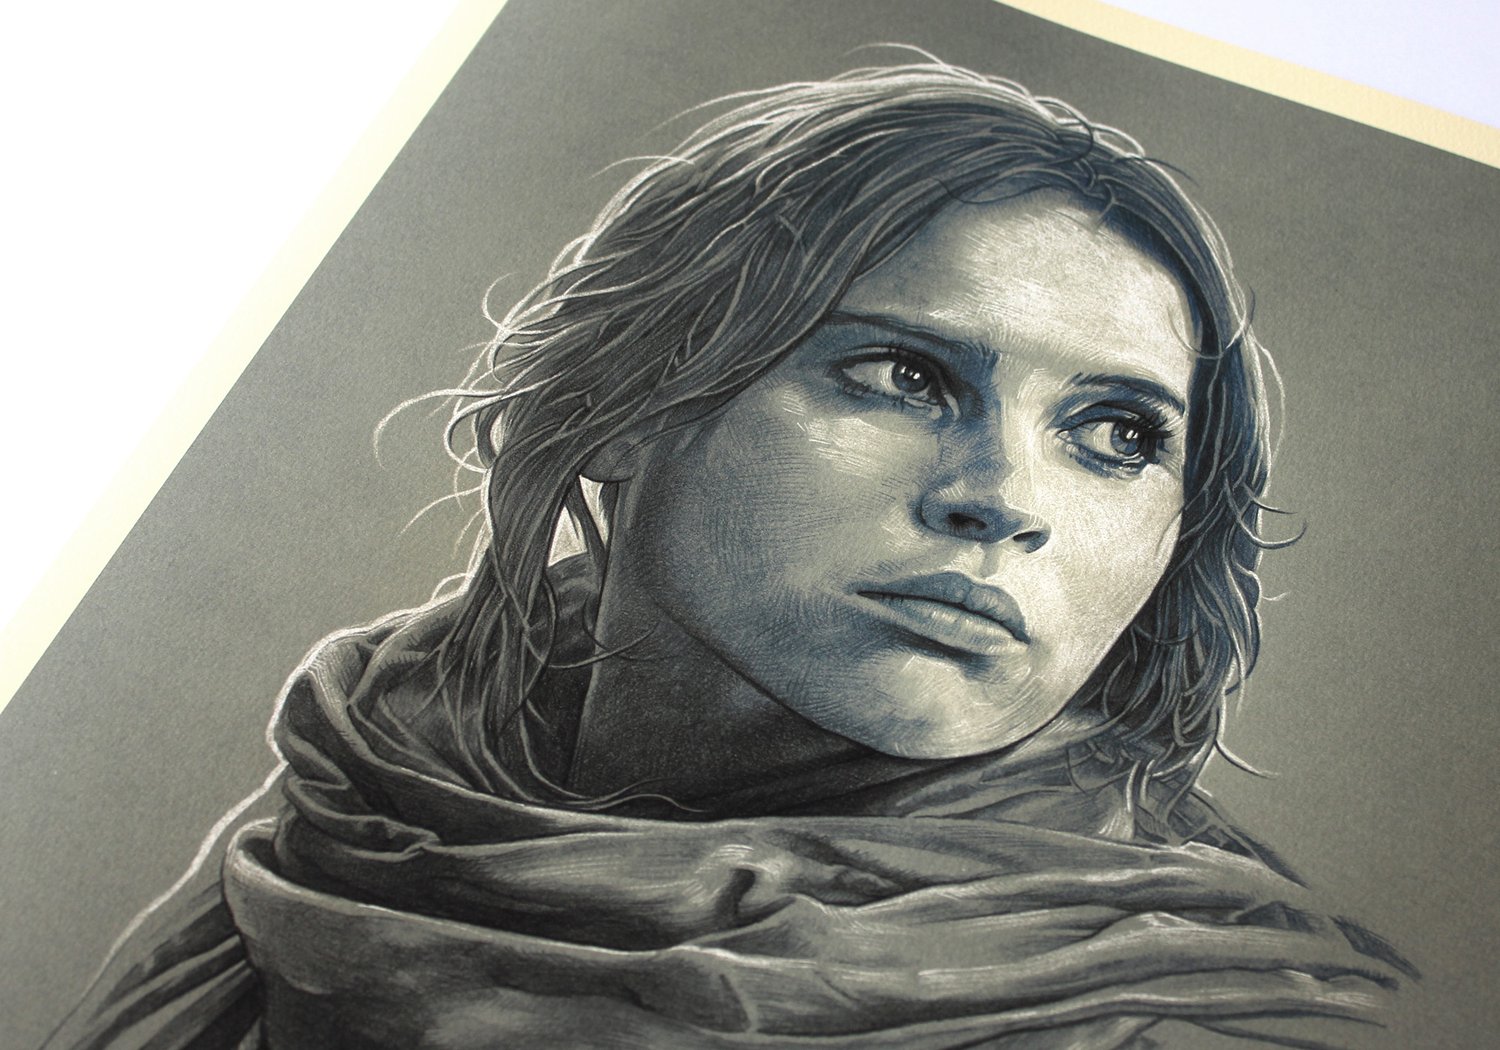 Image of Jyn Erso